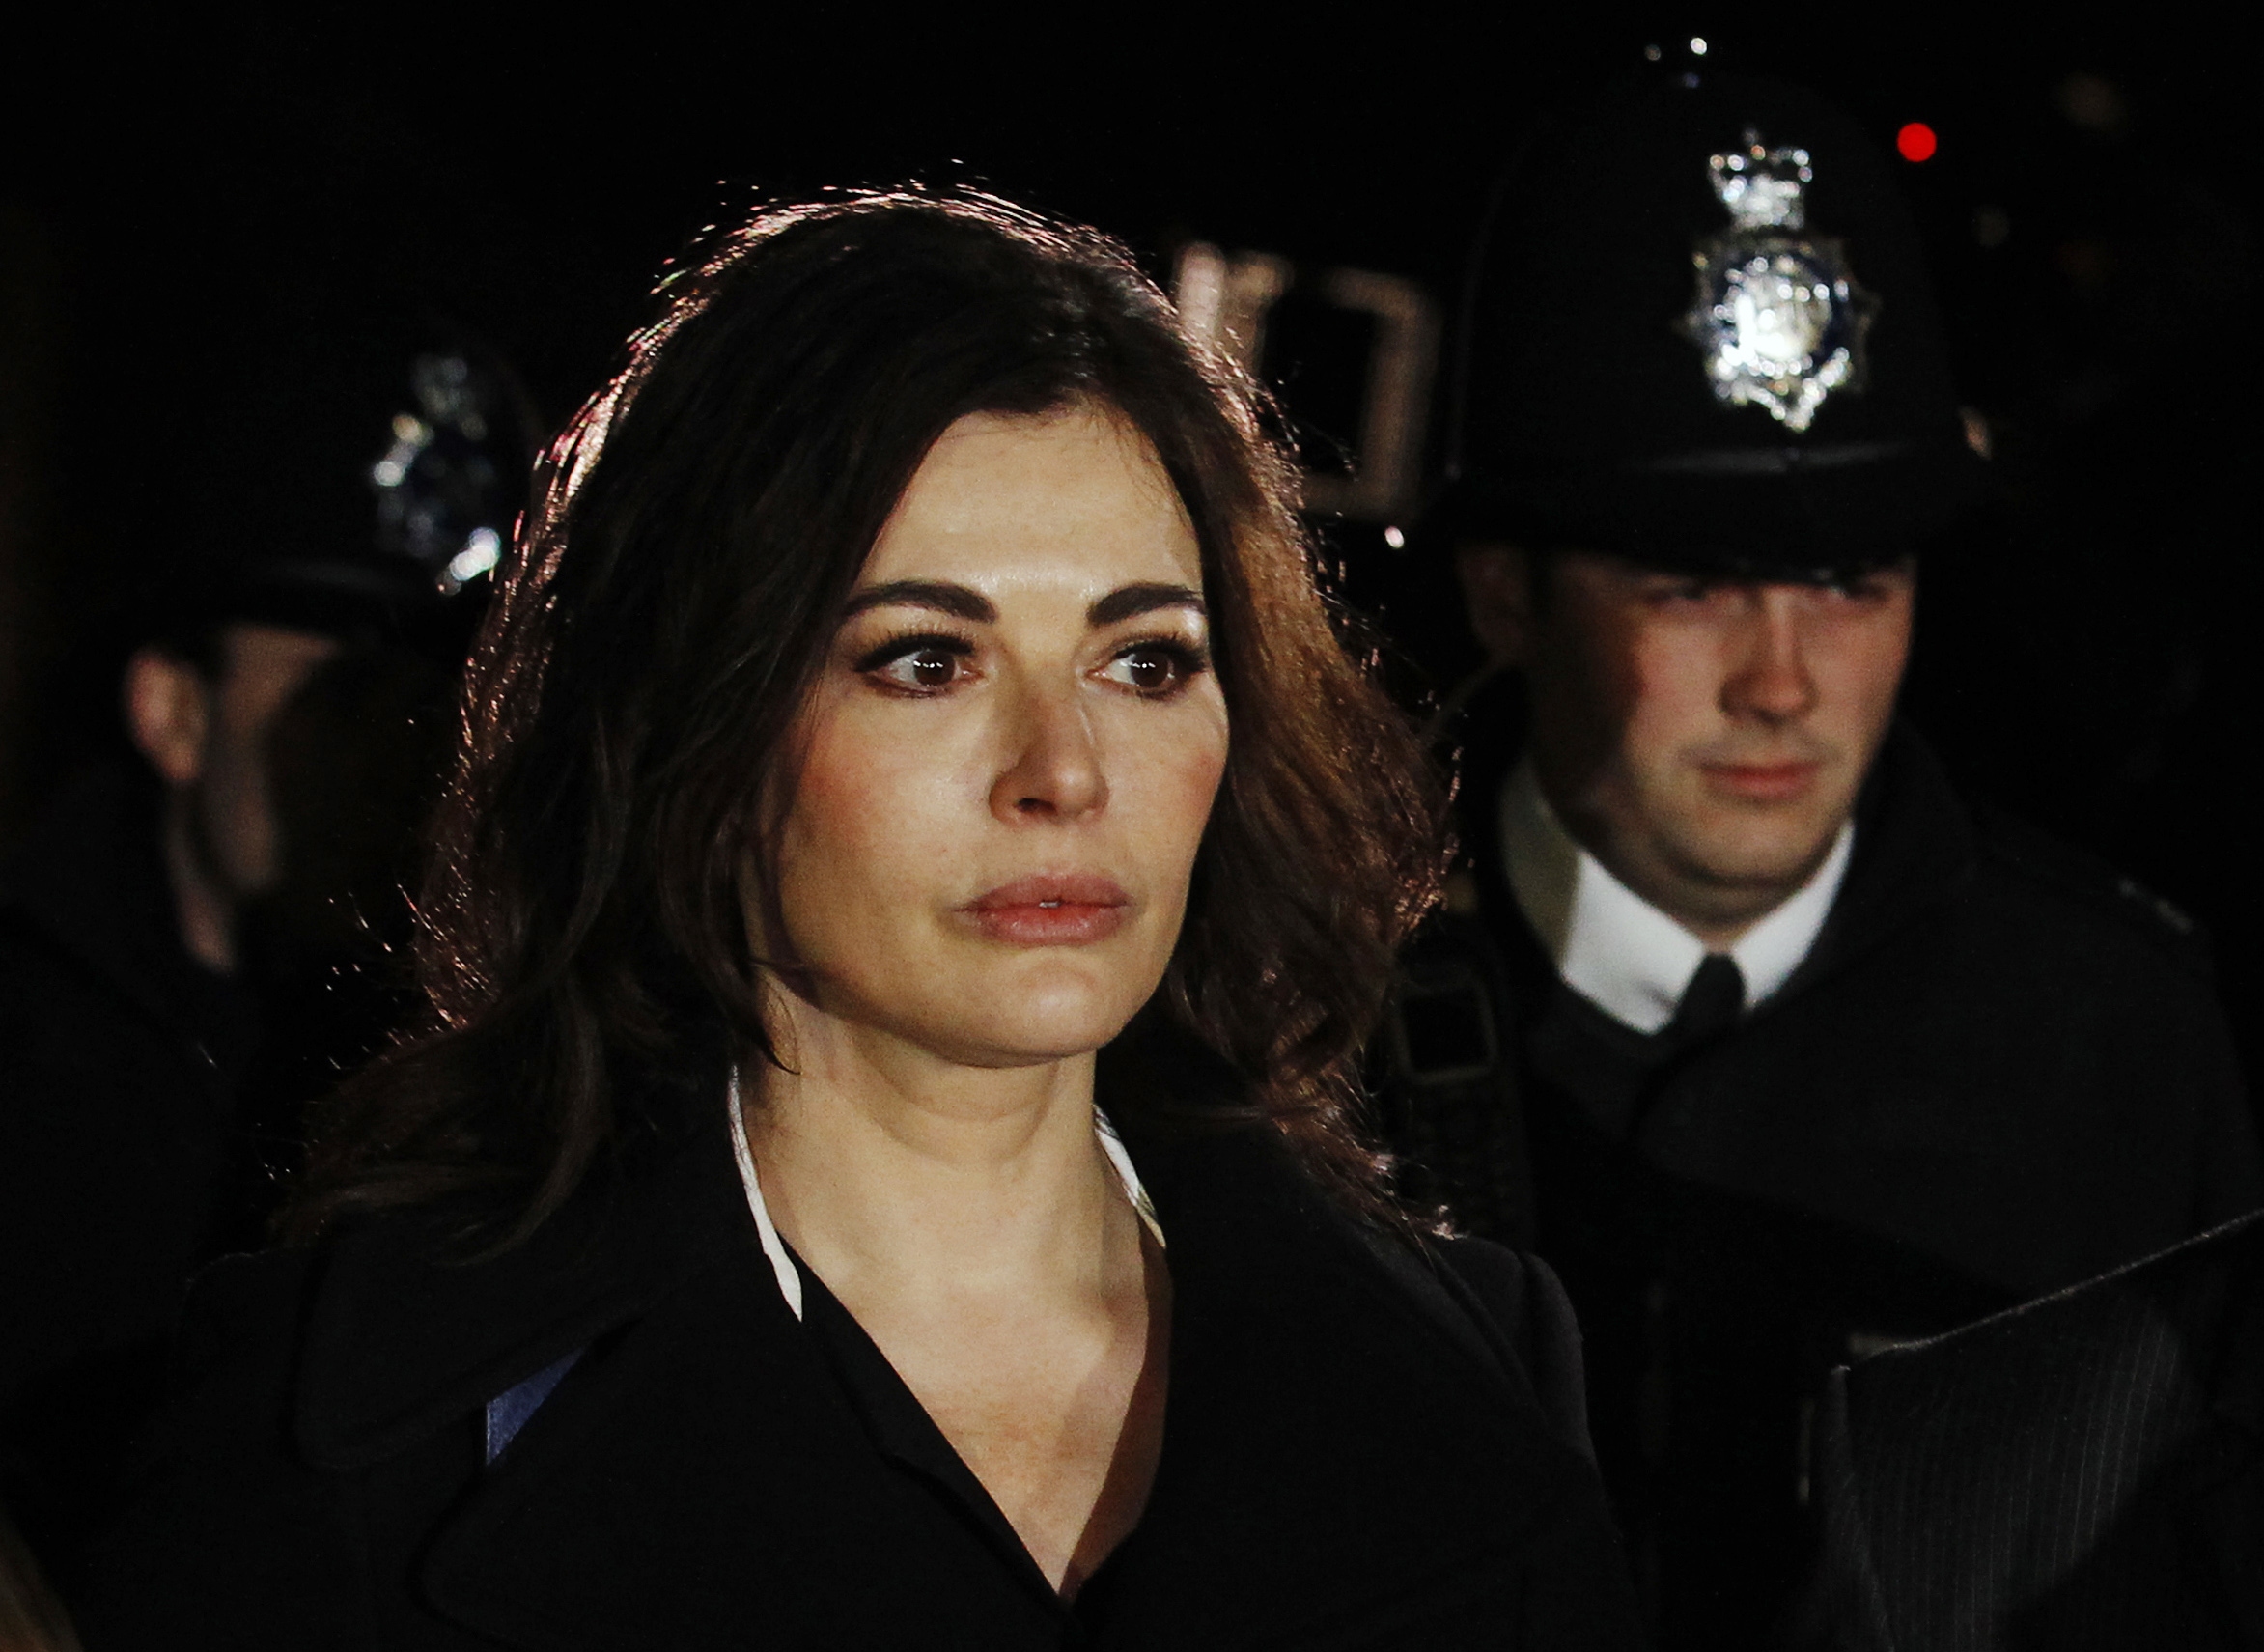 TV chef Nigella Lawson leaves Isleworth Crown Court in London on Wednesday. Photo: Reuters